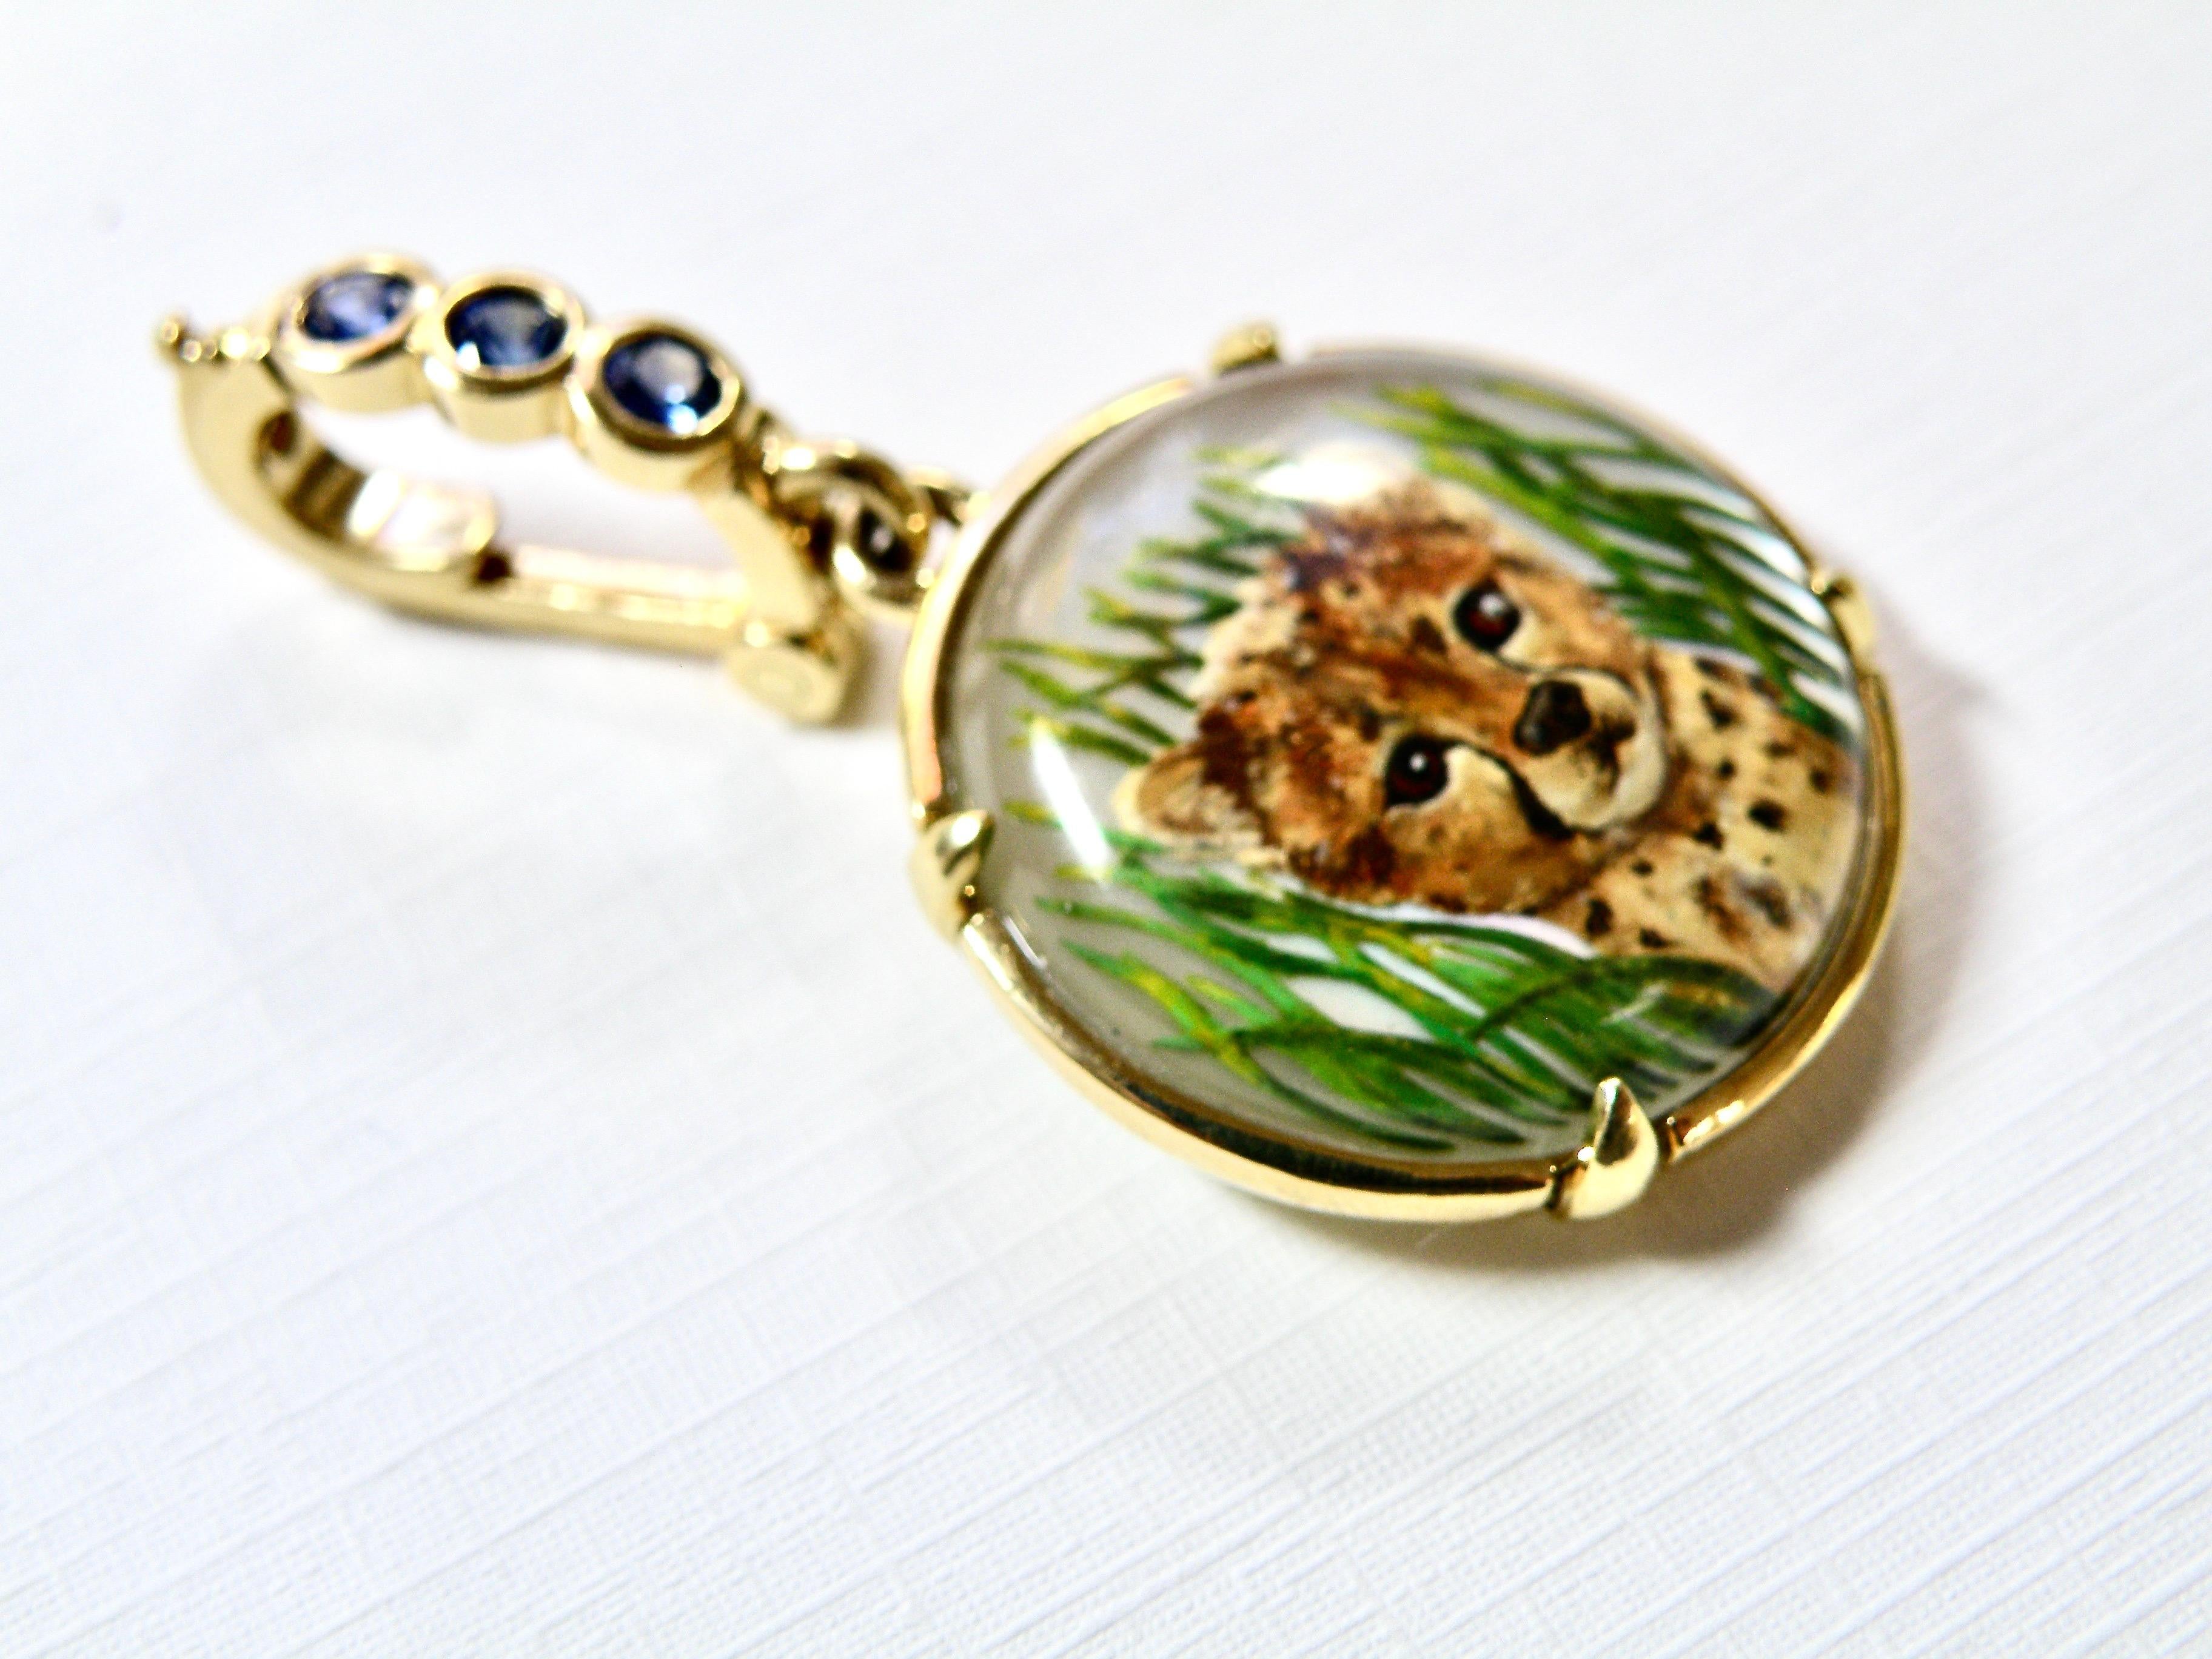 18K lion cub pendant beautifully detailed hand painted reverse quartz crystal backed with mothher of pearl hand painted by Master Carver from Idar Oberstein 14mm round